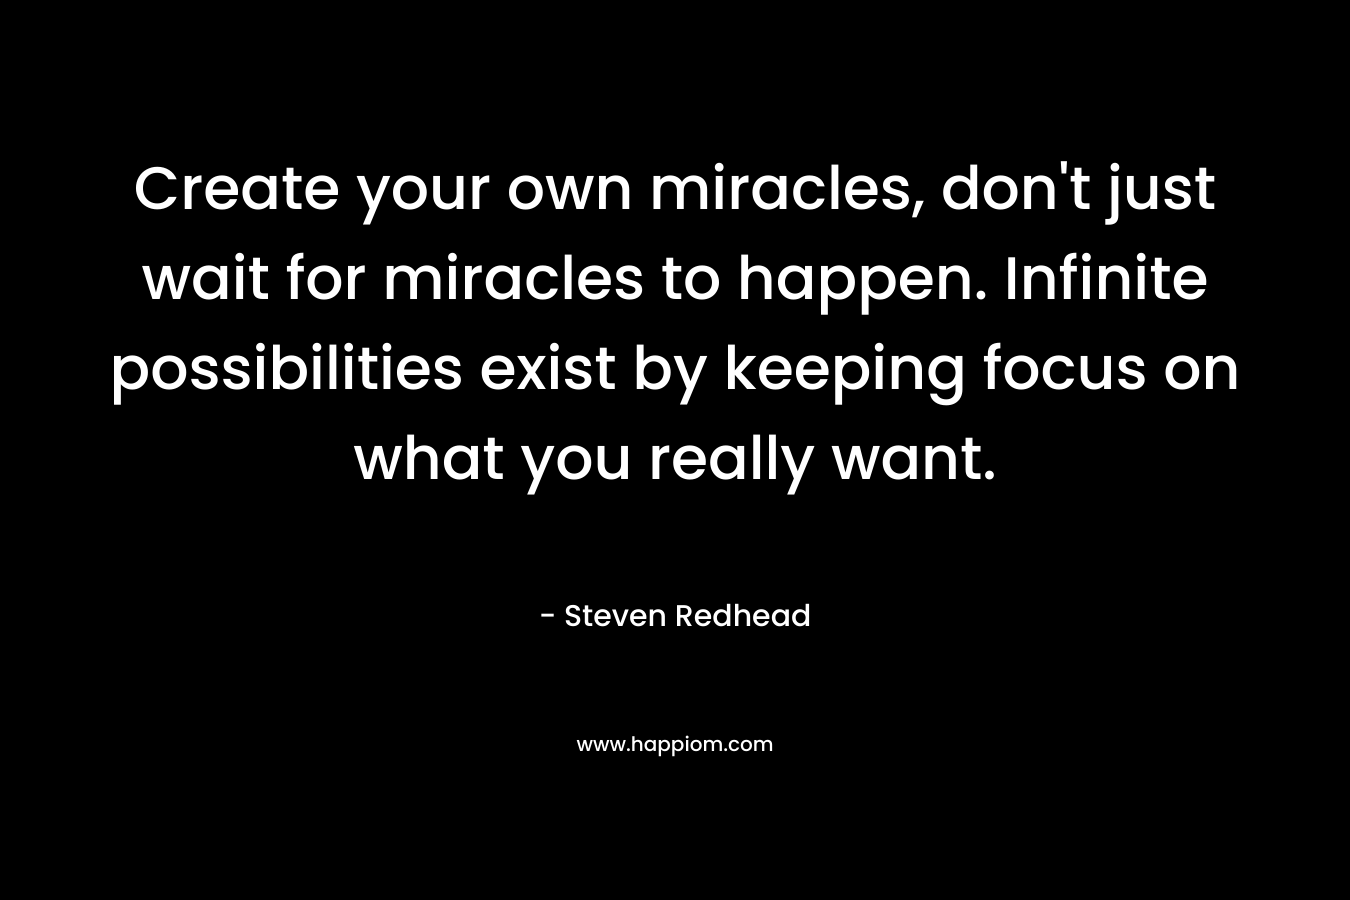 Create your own miracles, don't just wait for miracles to happen. Infinite possibilities exist by keeping focus on what you really want.